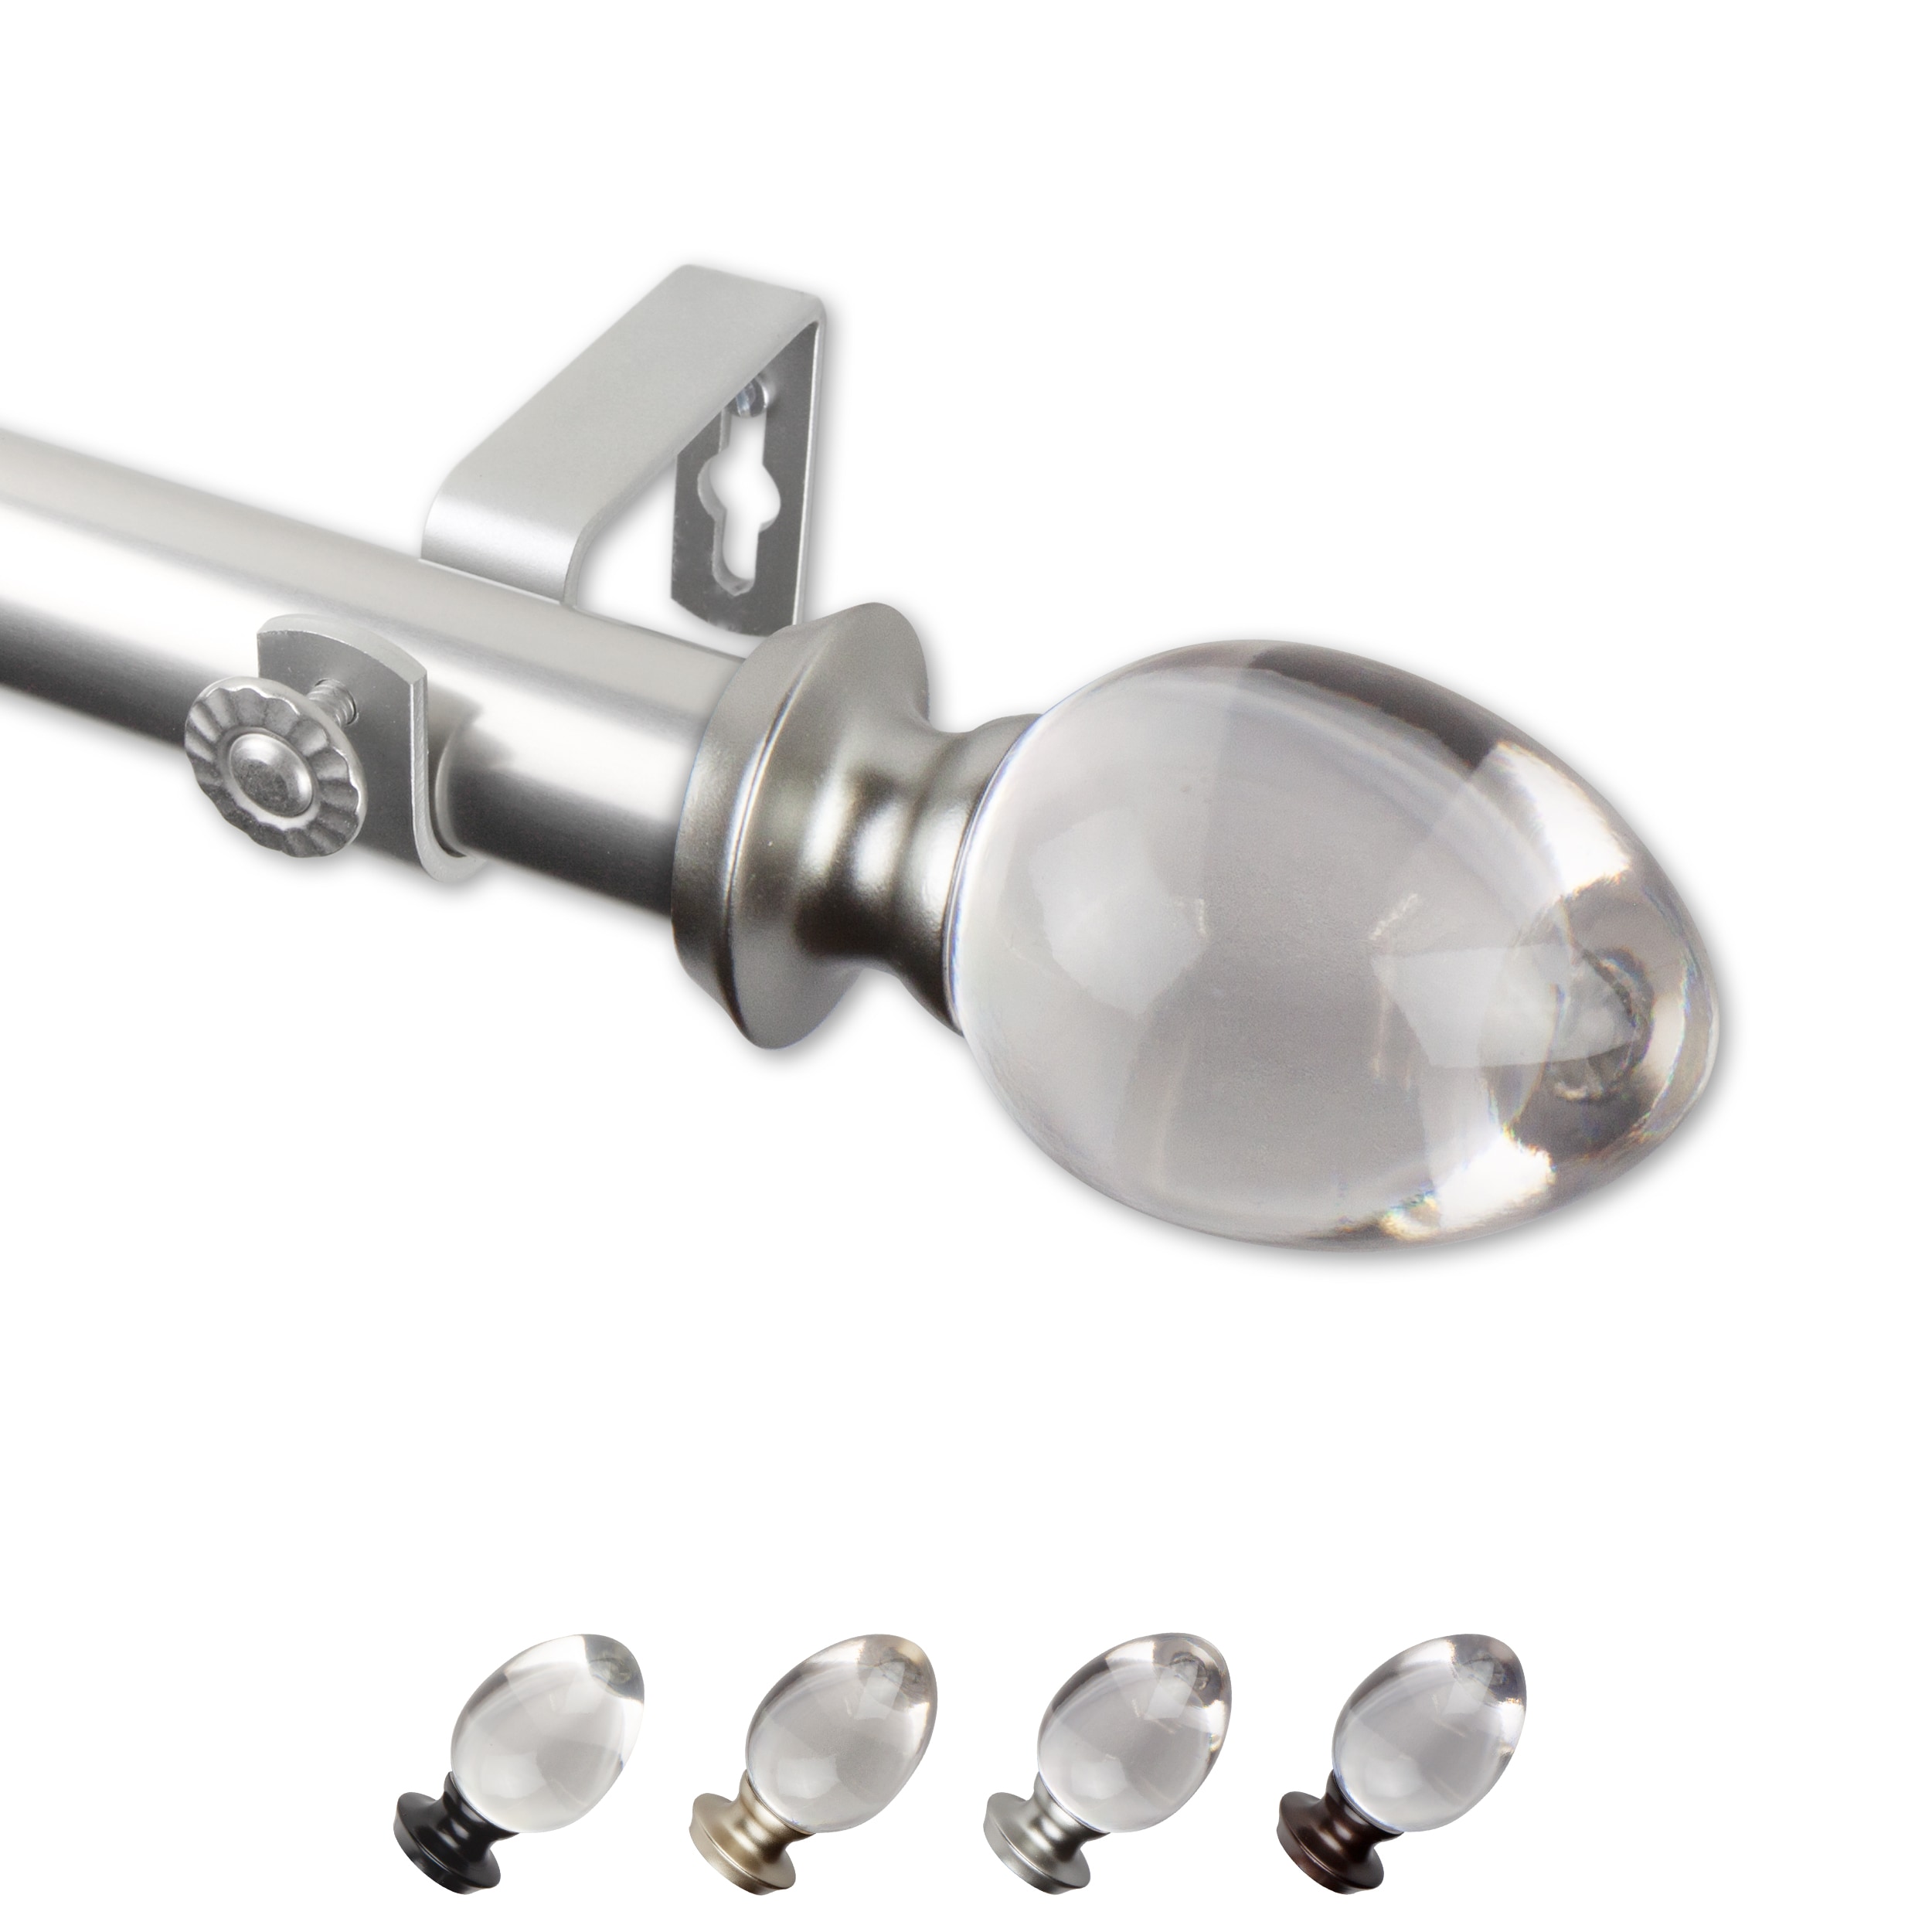 28mm Extendable Ceiling Fit Curtain Pole With Brackets Metal Ball Finials Rings 